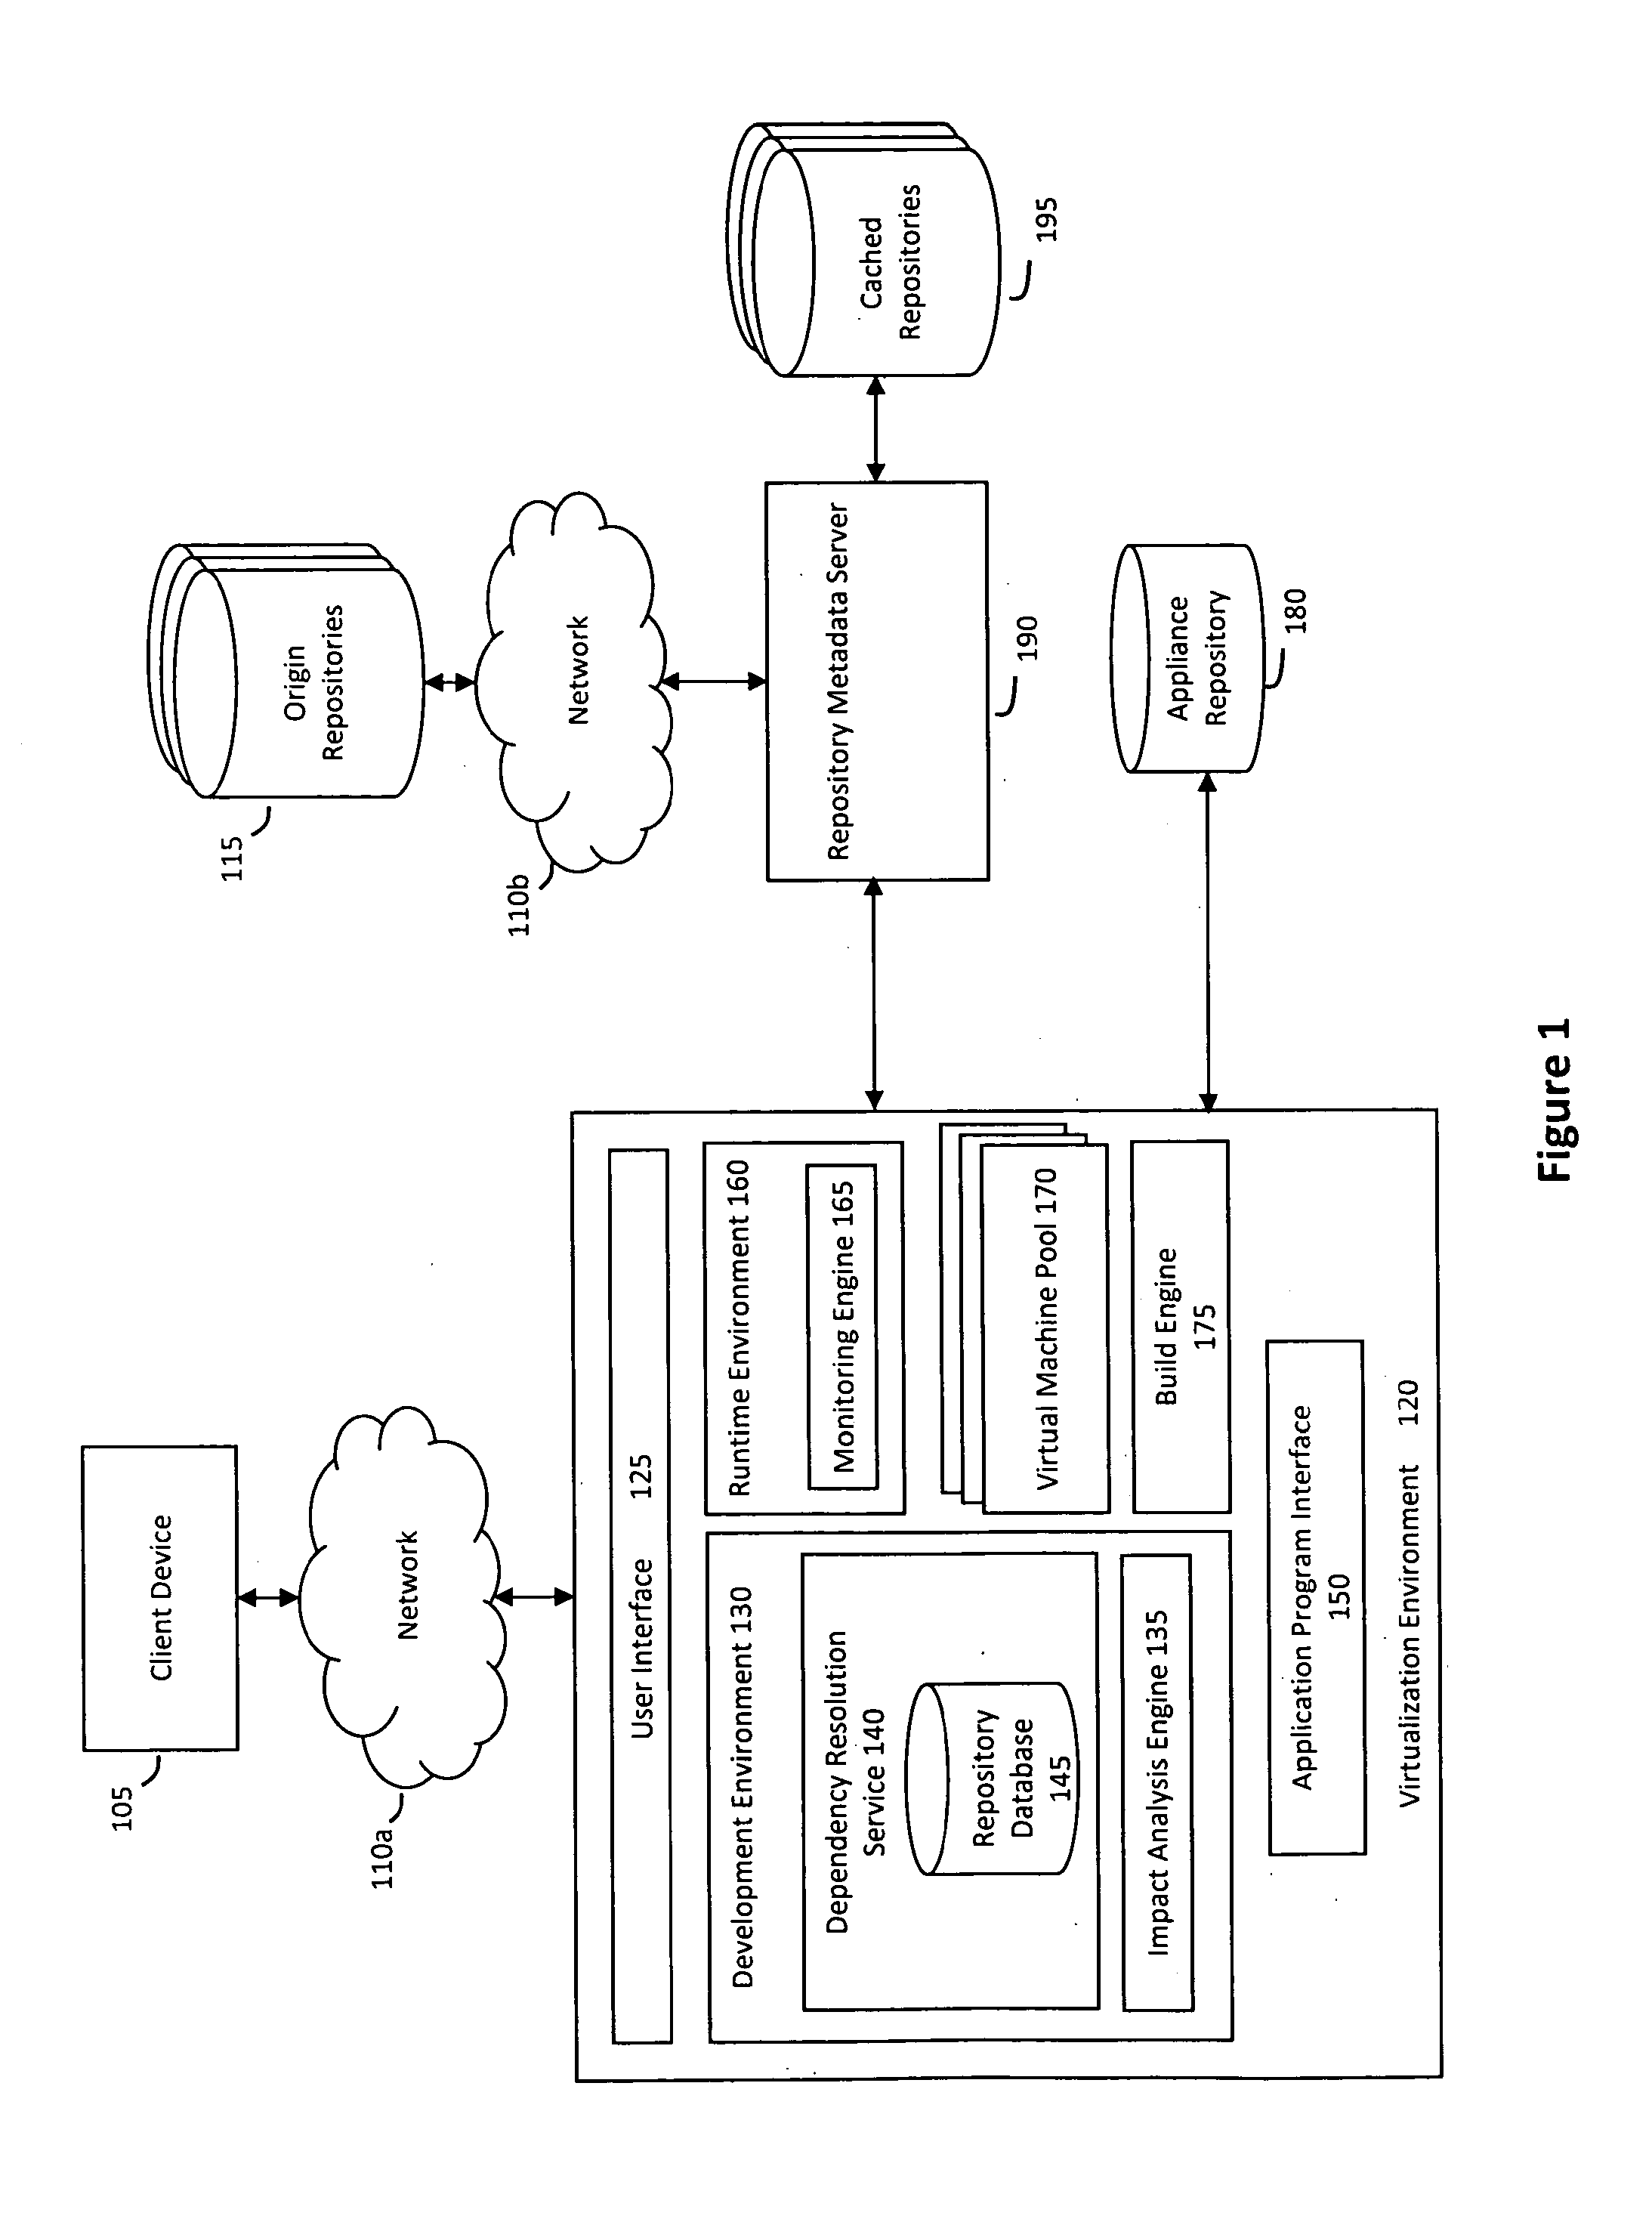 System and method for efficiently building virtual appliances in a hosted environment